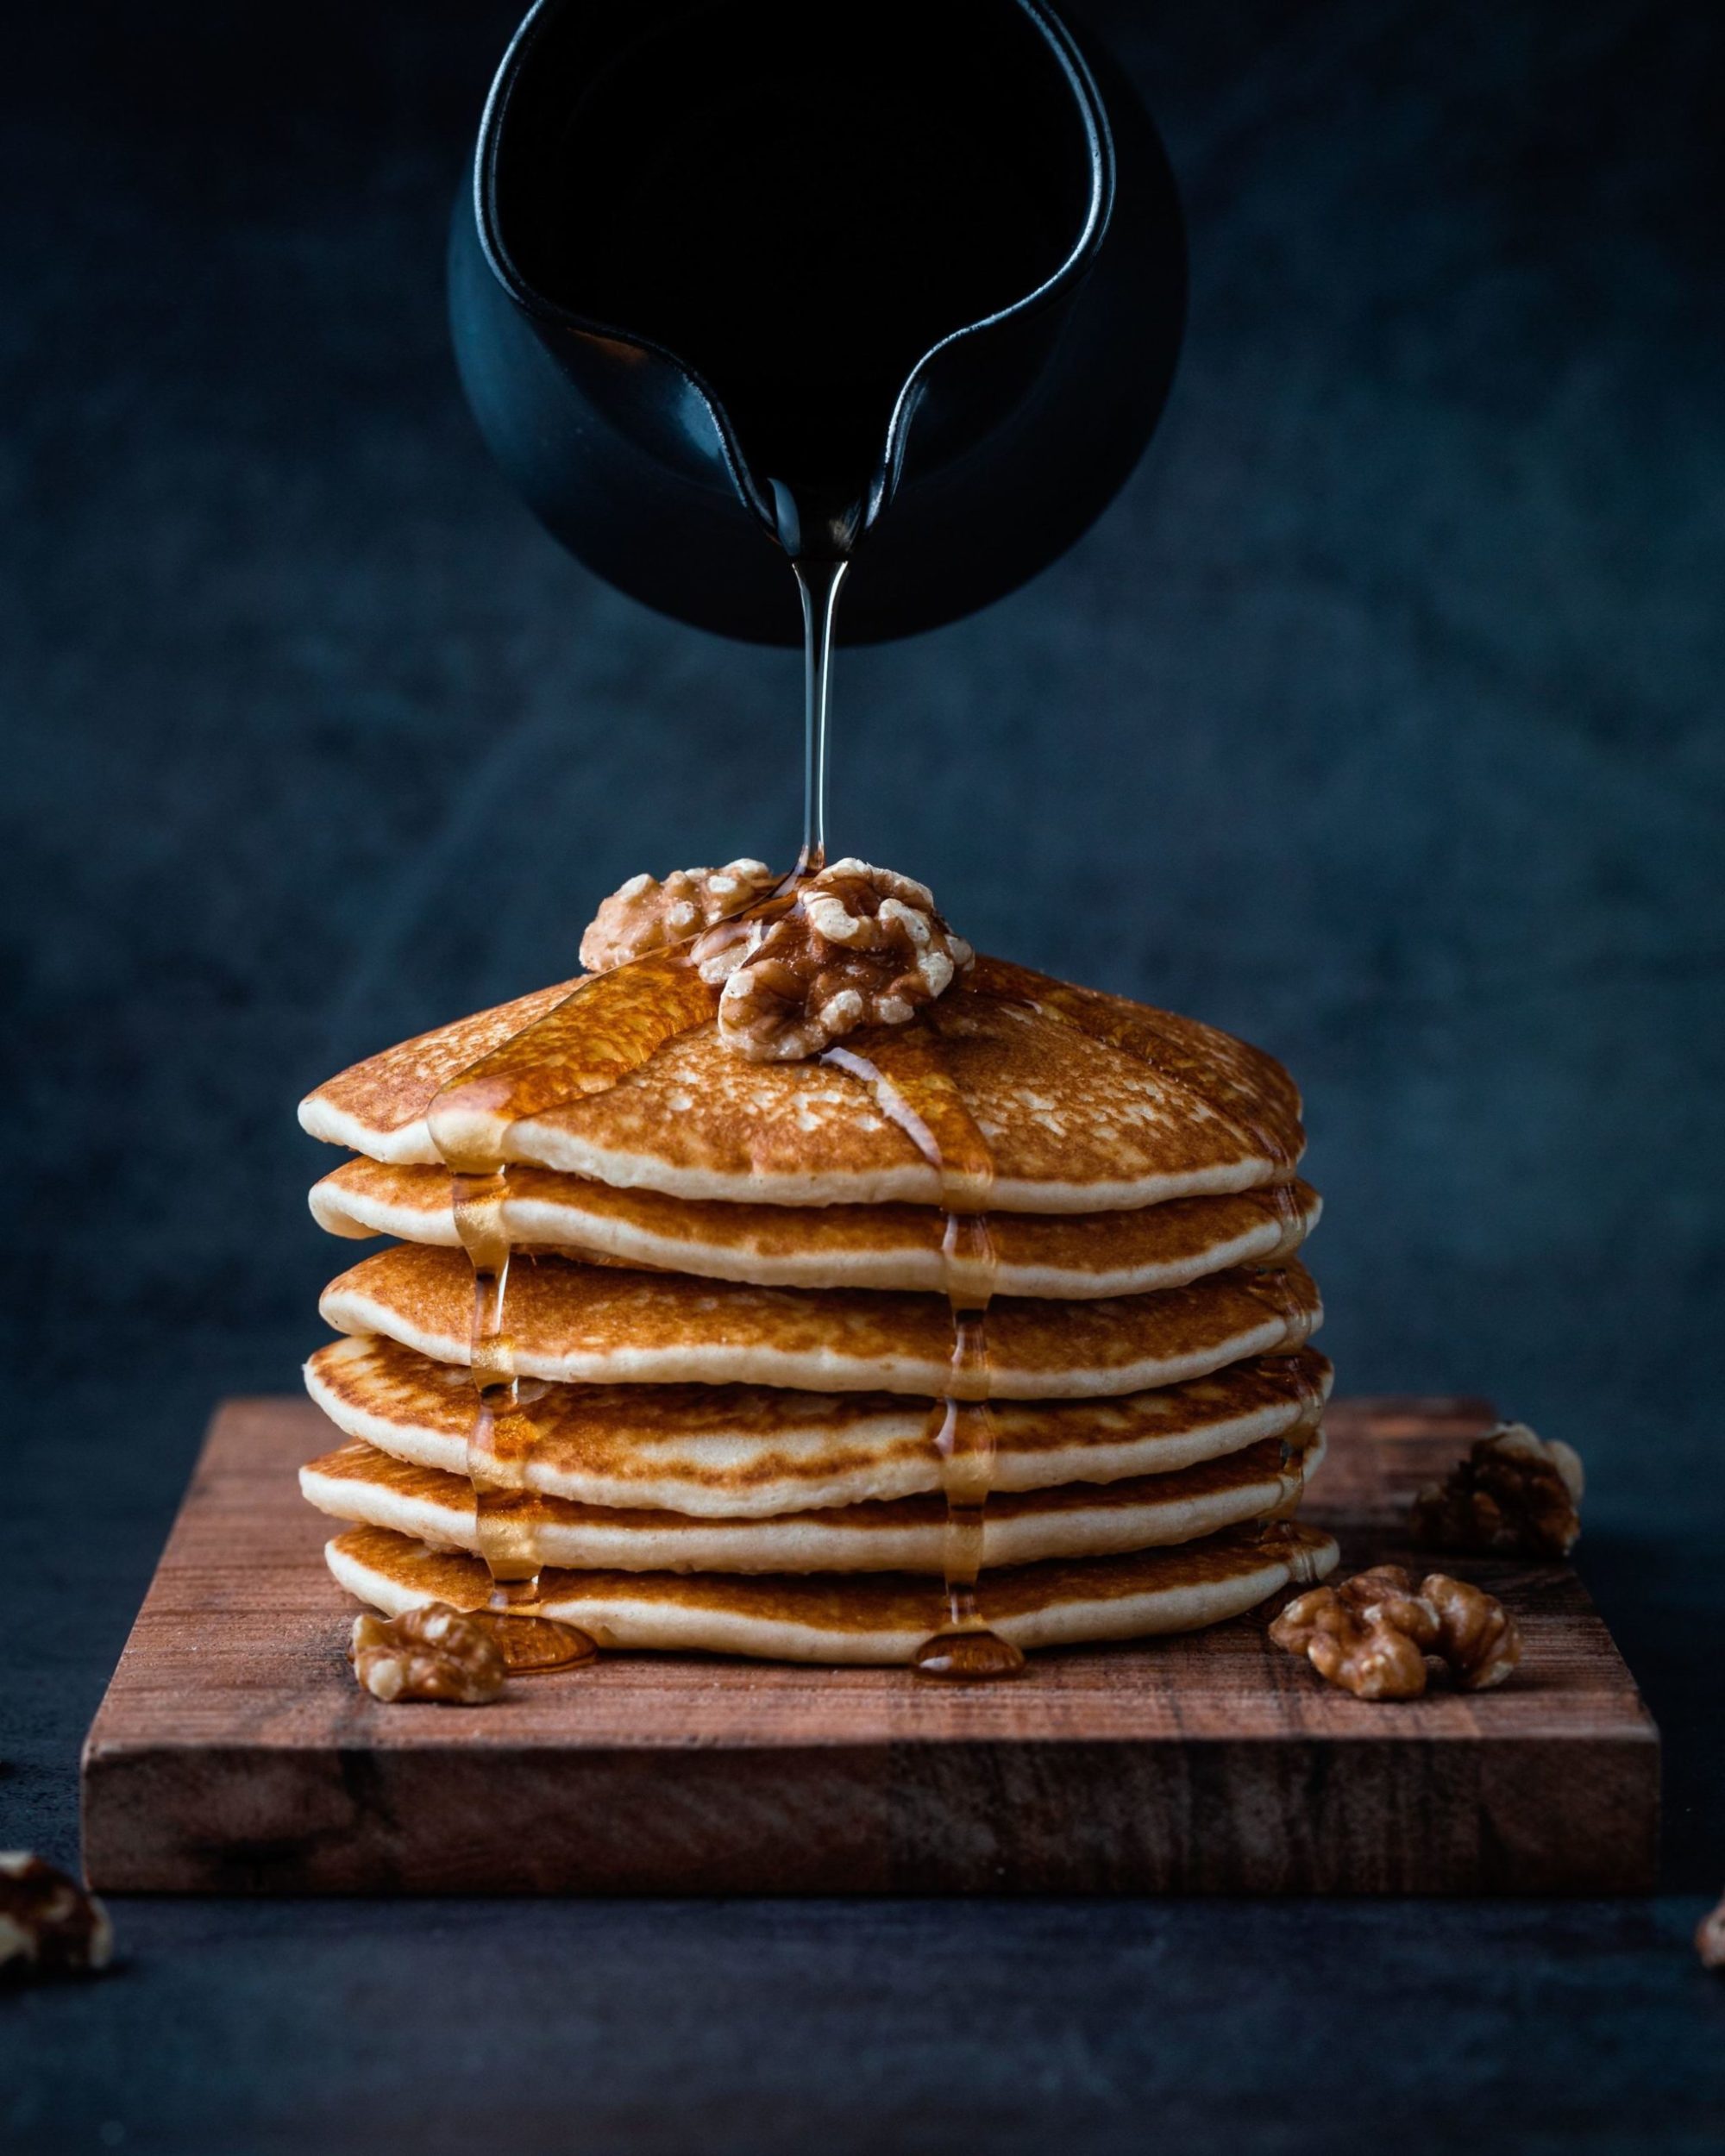 pitcher of maple syrup being poured over a stack of pancakes with walnuts